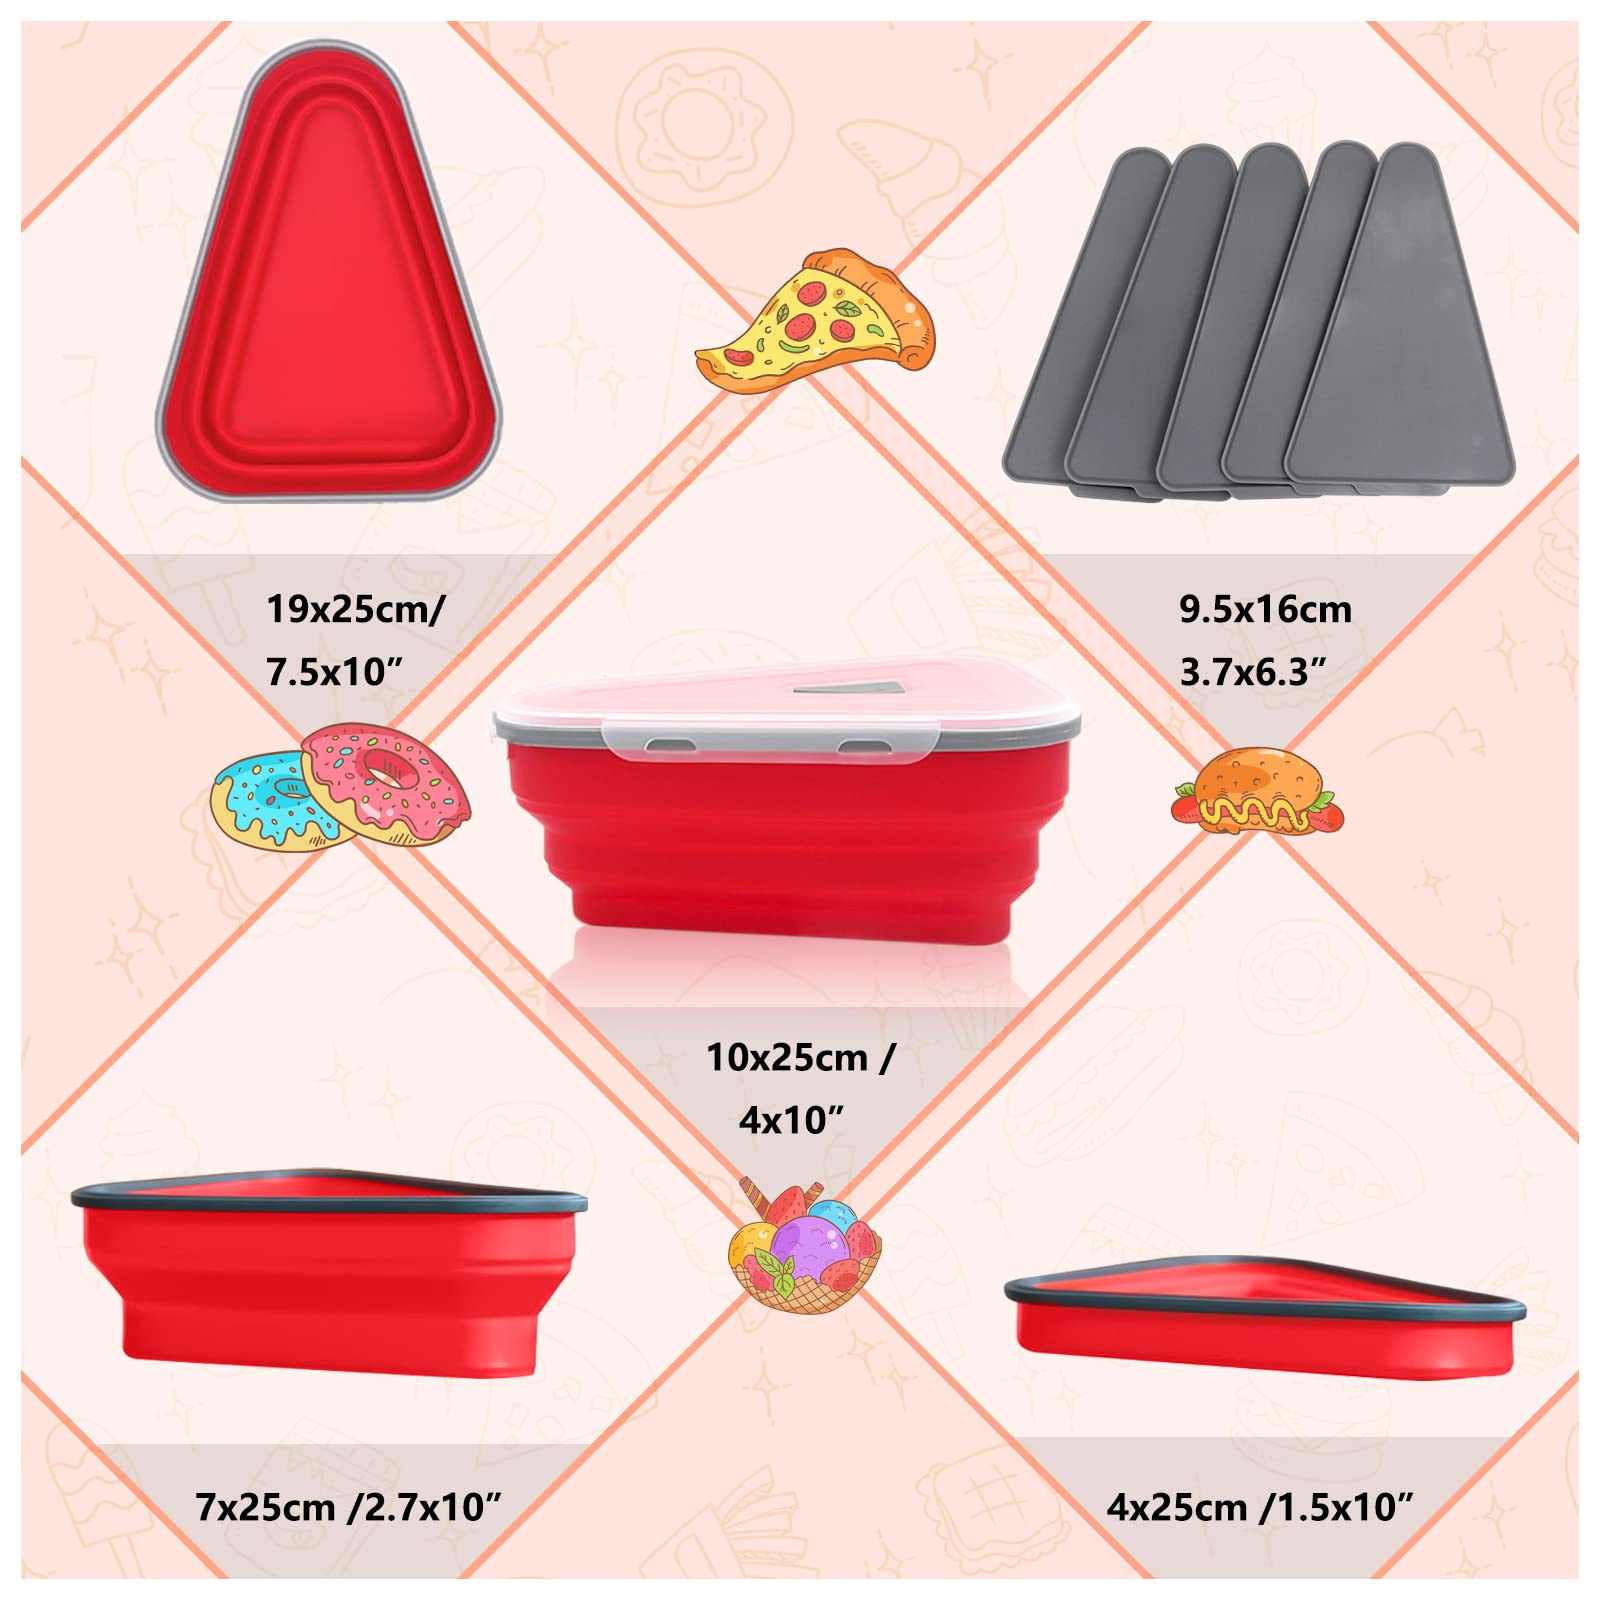 Kasalida Leftover Pizza Storage Container Pizza Container Expandable with 5 Microwavable Serving Trays Dishwasher Safe BPA Free and Microwave Friendly (Red)